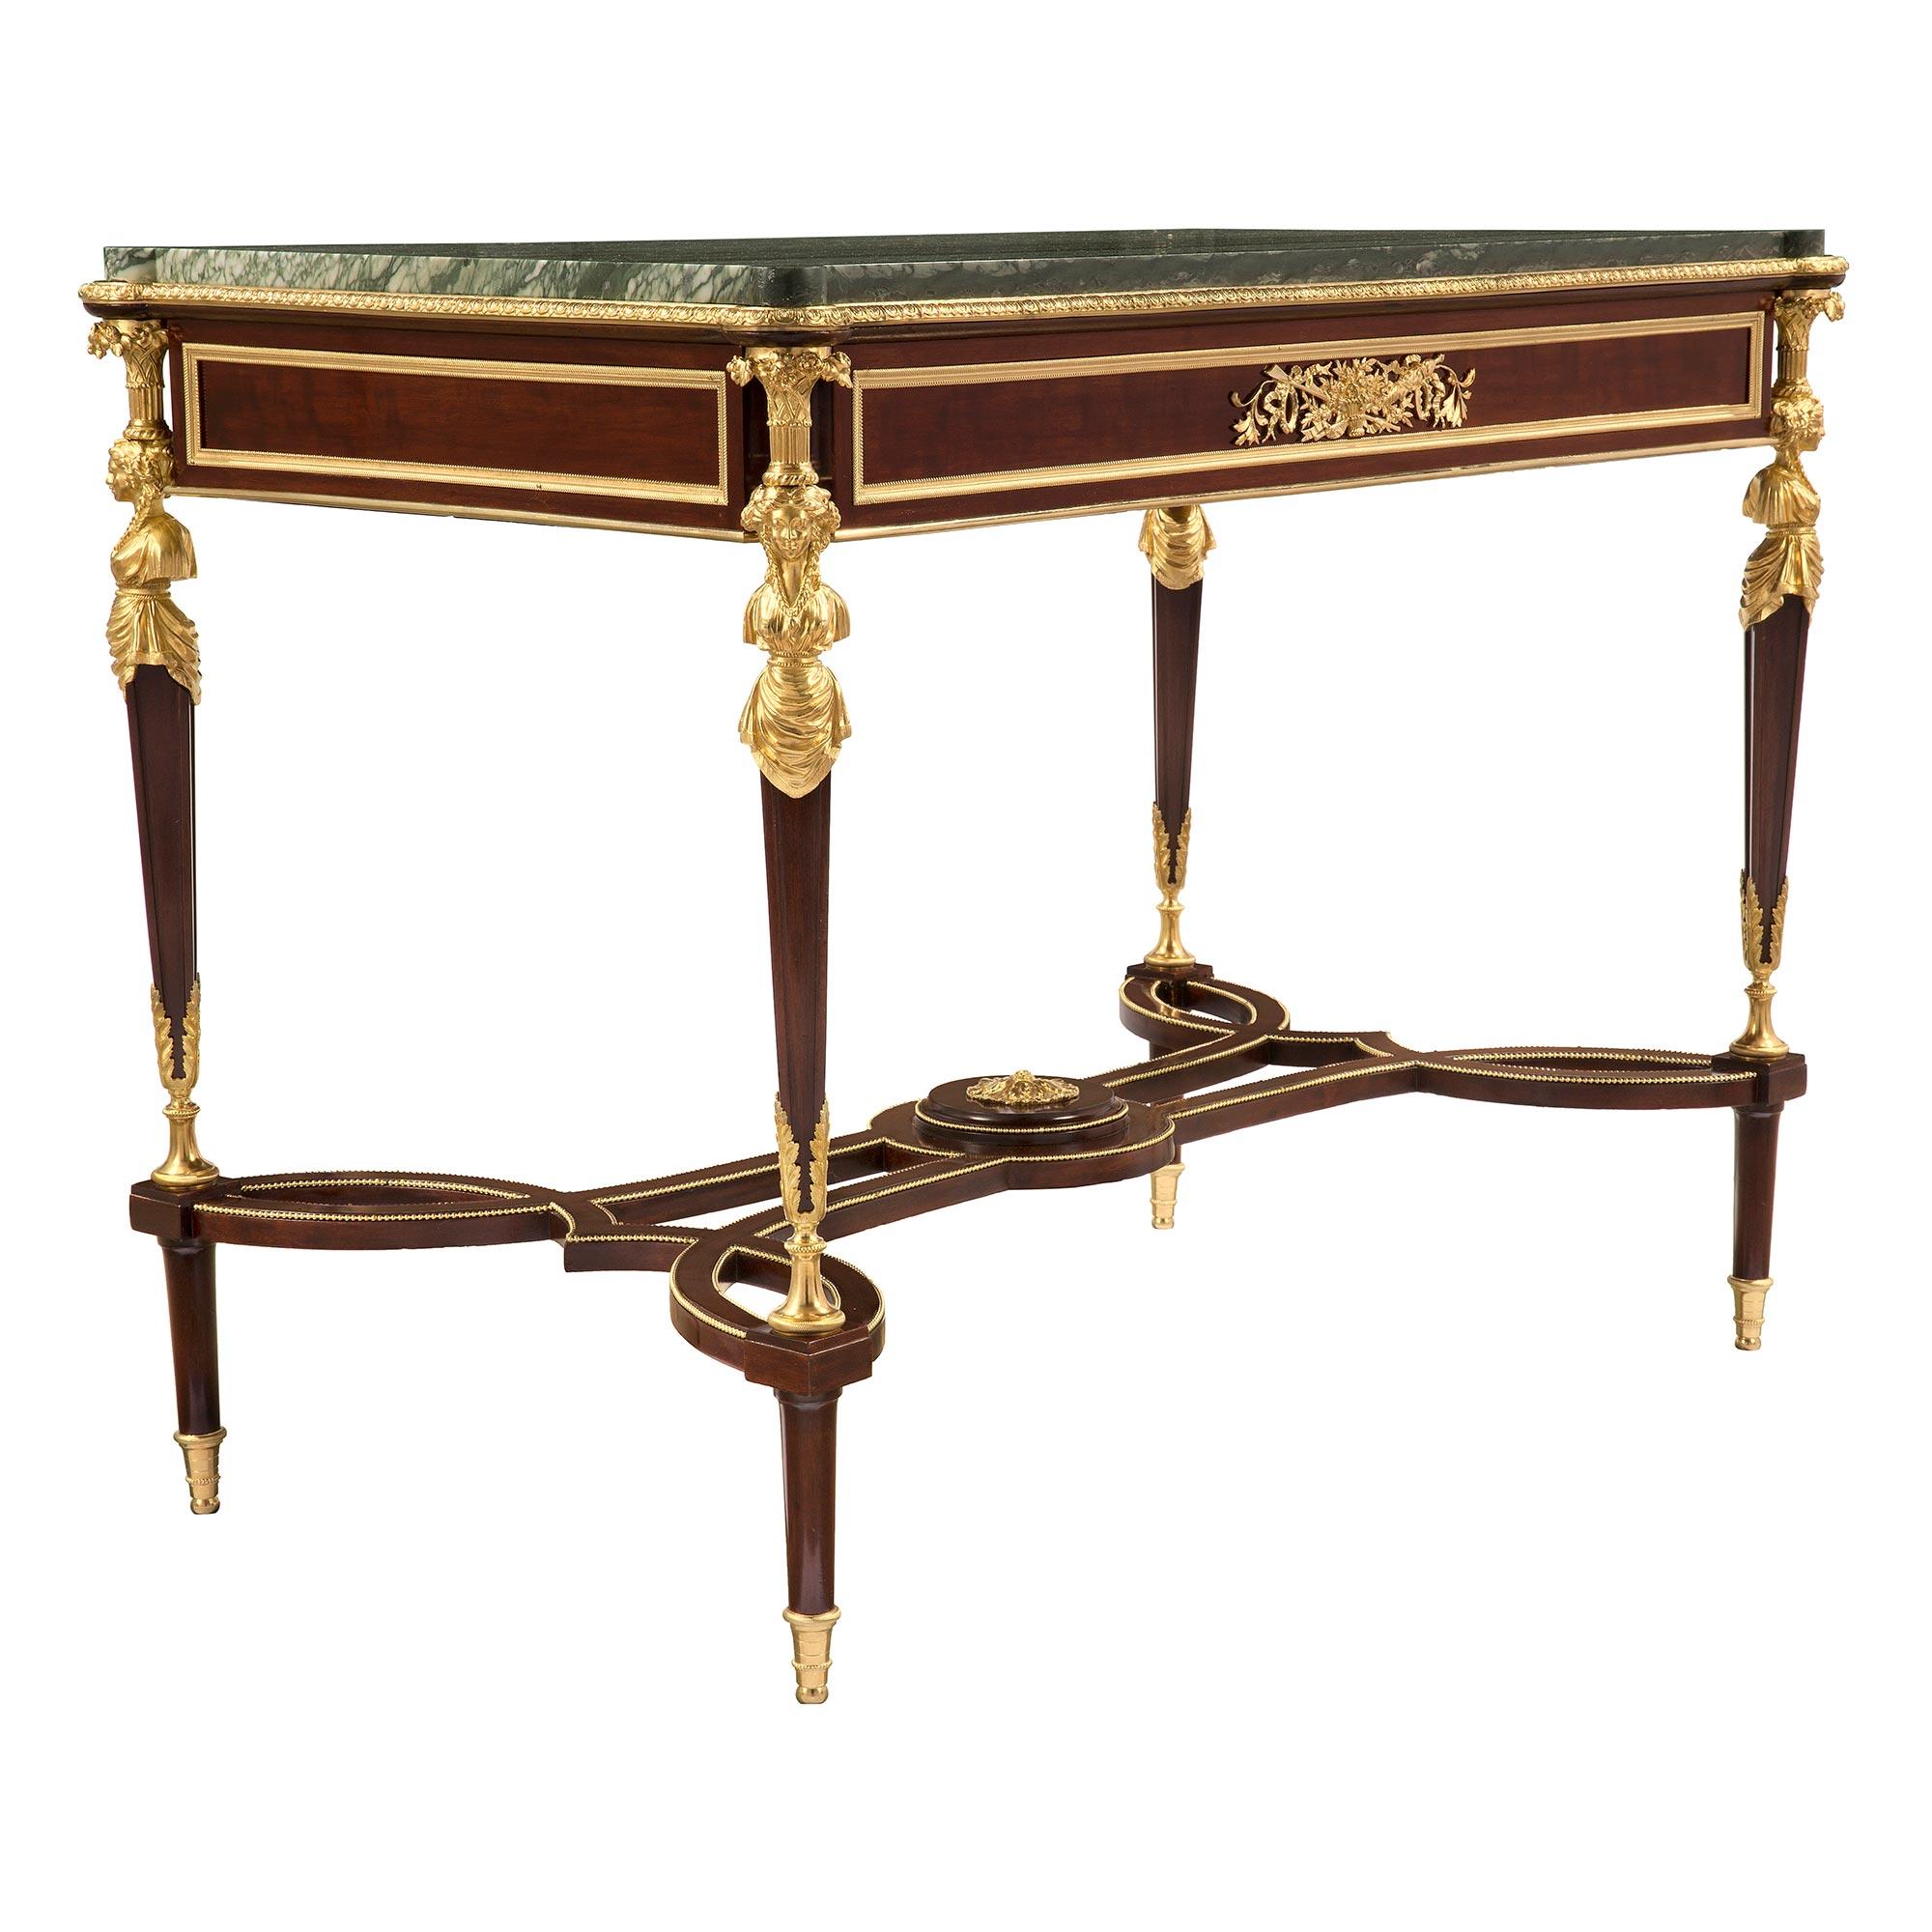 Louis XVI French 19th Century Mahogany, Ormolu and Marble Table, Attributed to Dasson For Sale